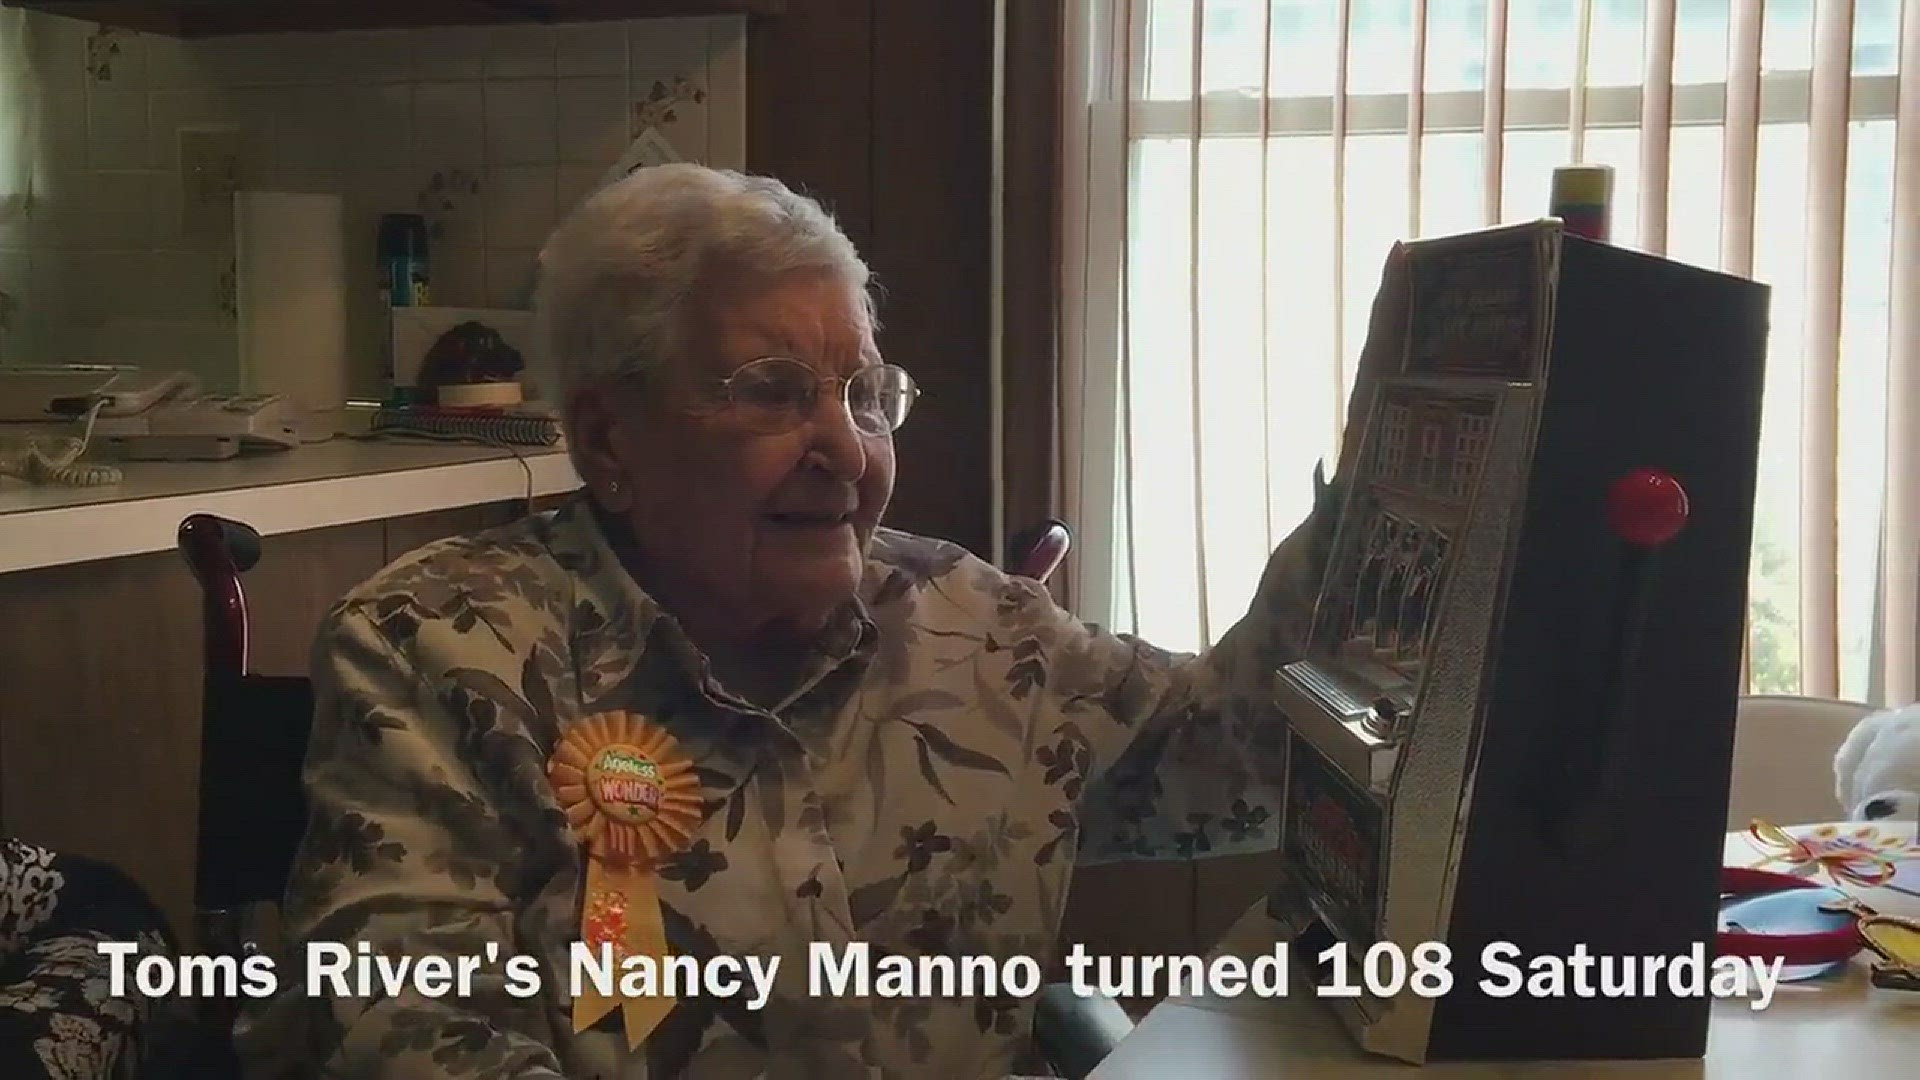 To mark her 108th birthday, Nancy Manno played the slots, sang a song and enjoyed cake with family. Jerry Carino, Asbury Park Press